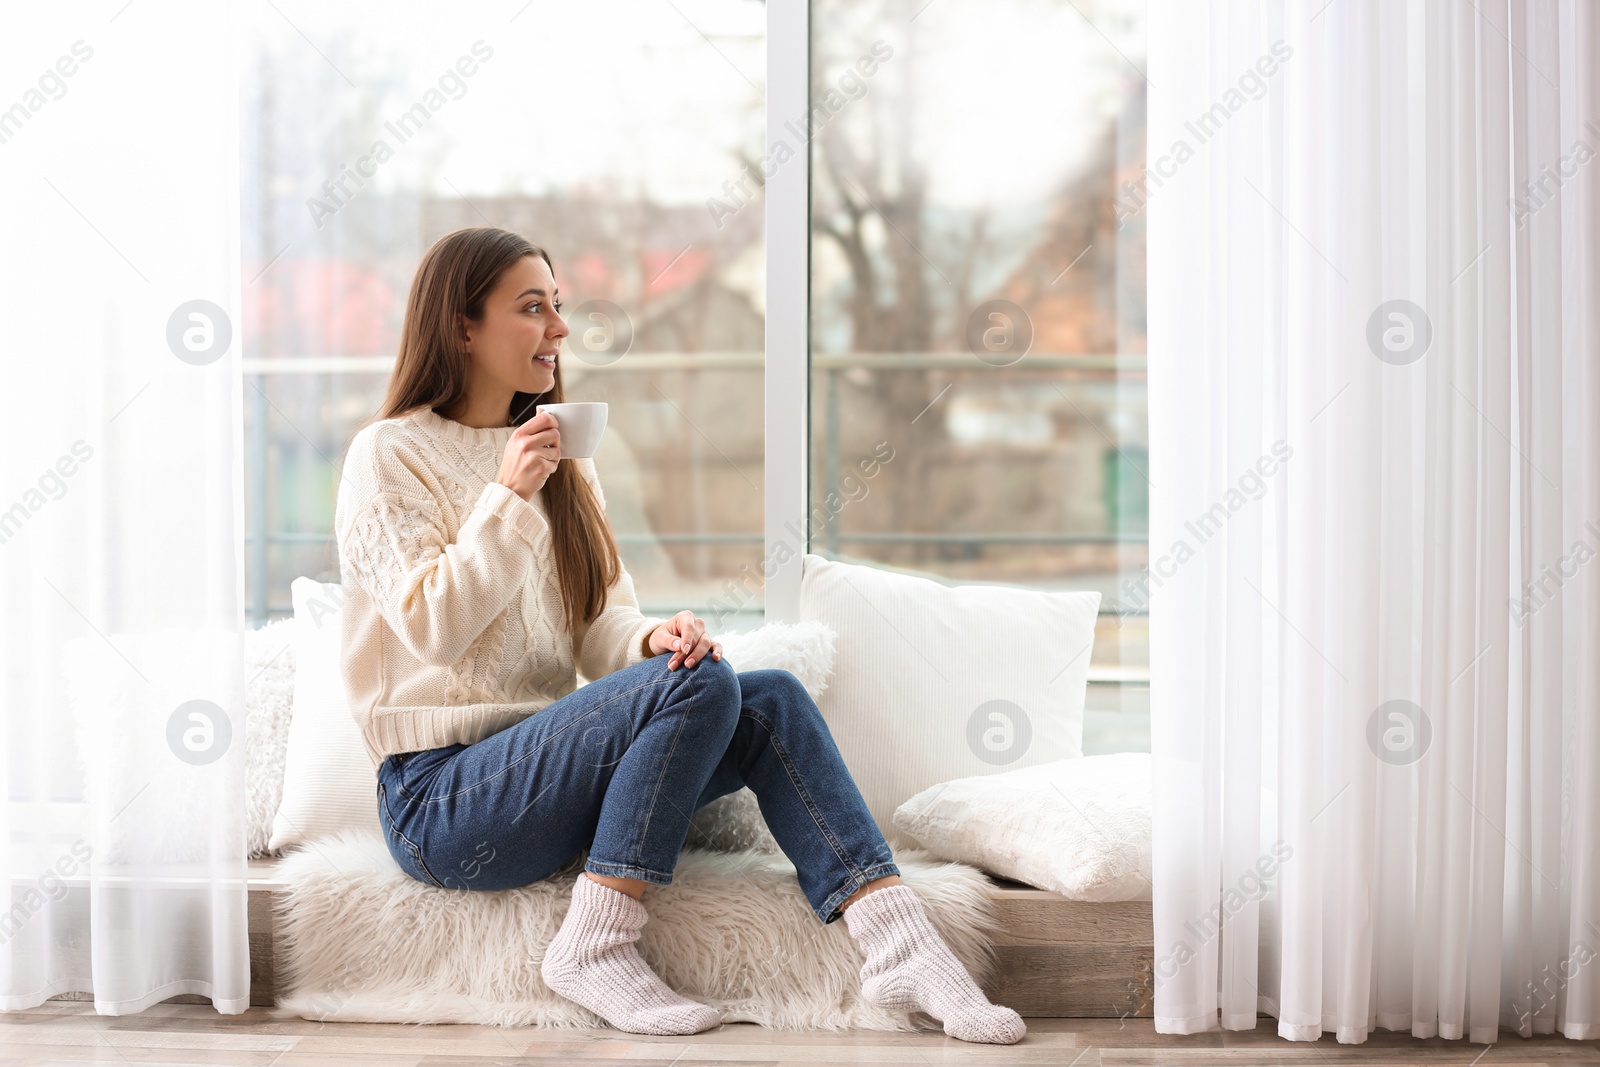 Photo of Young woman with cup near window indoors